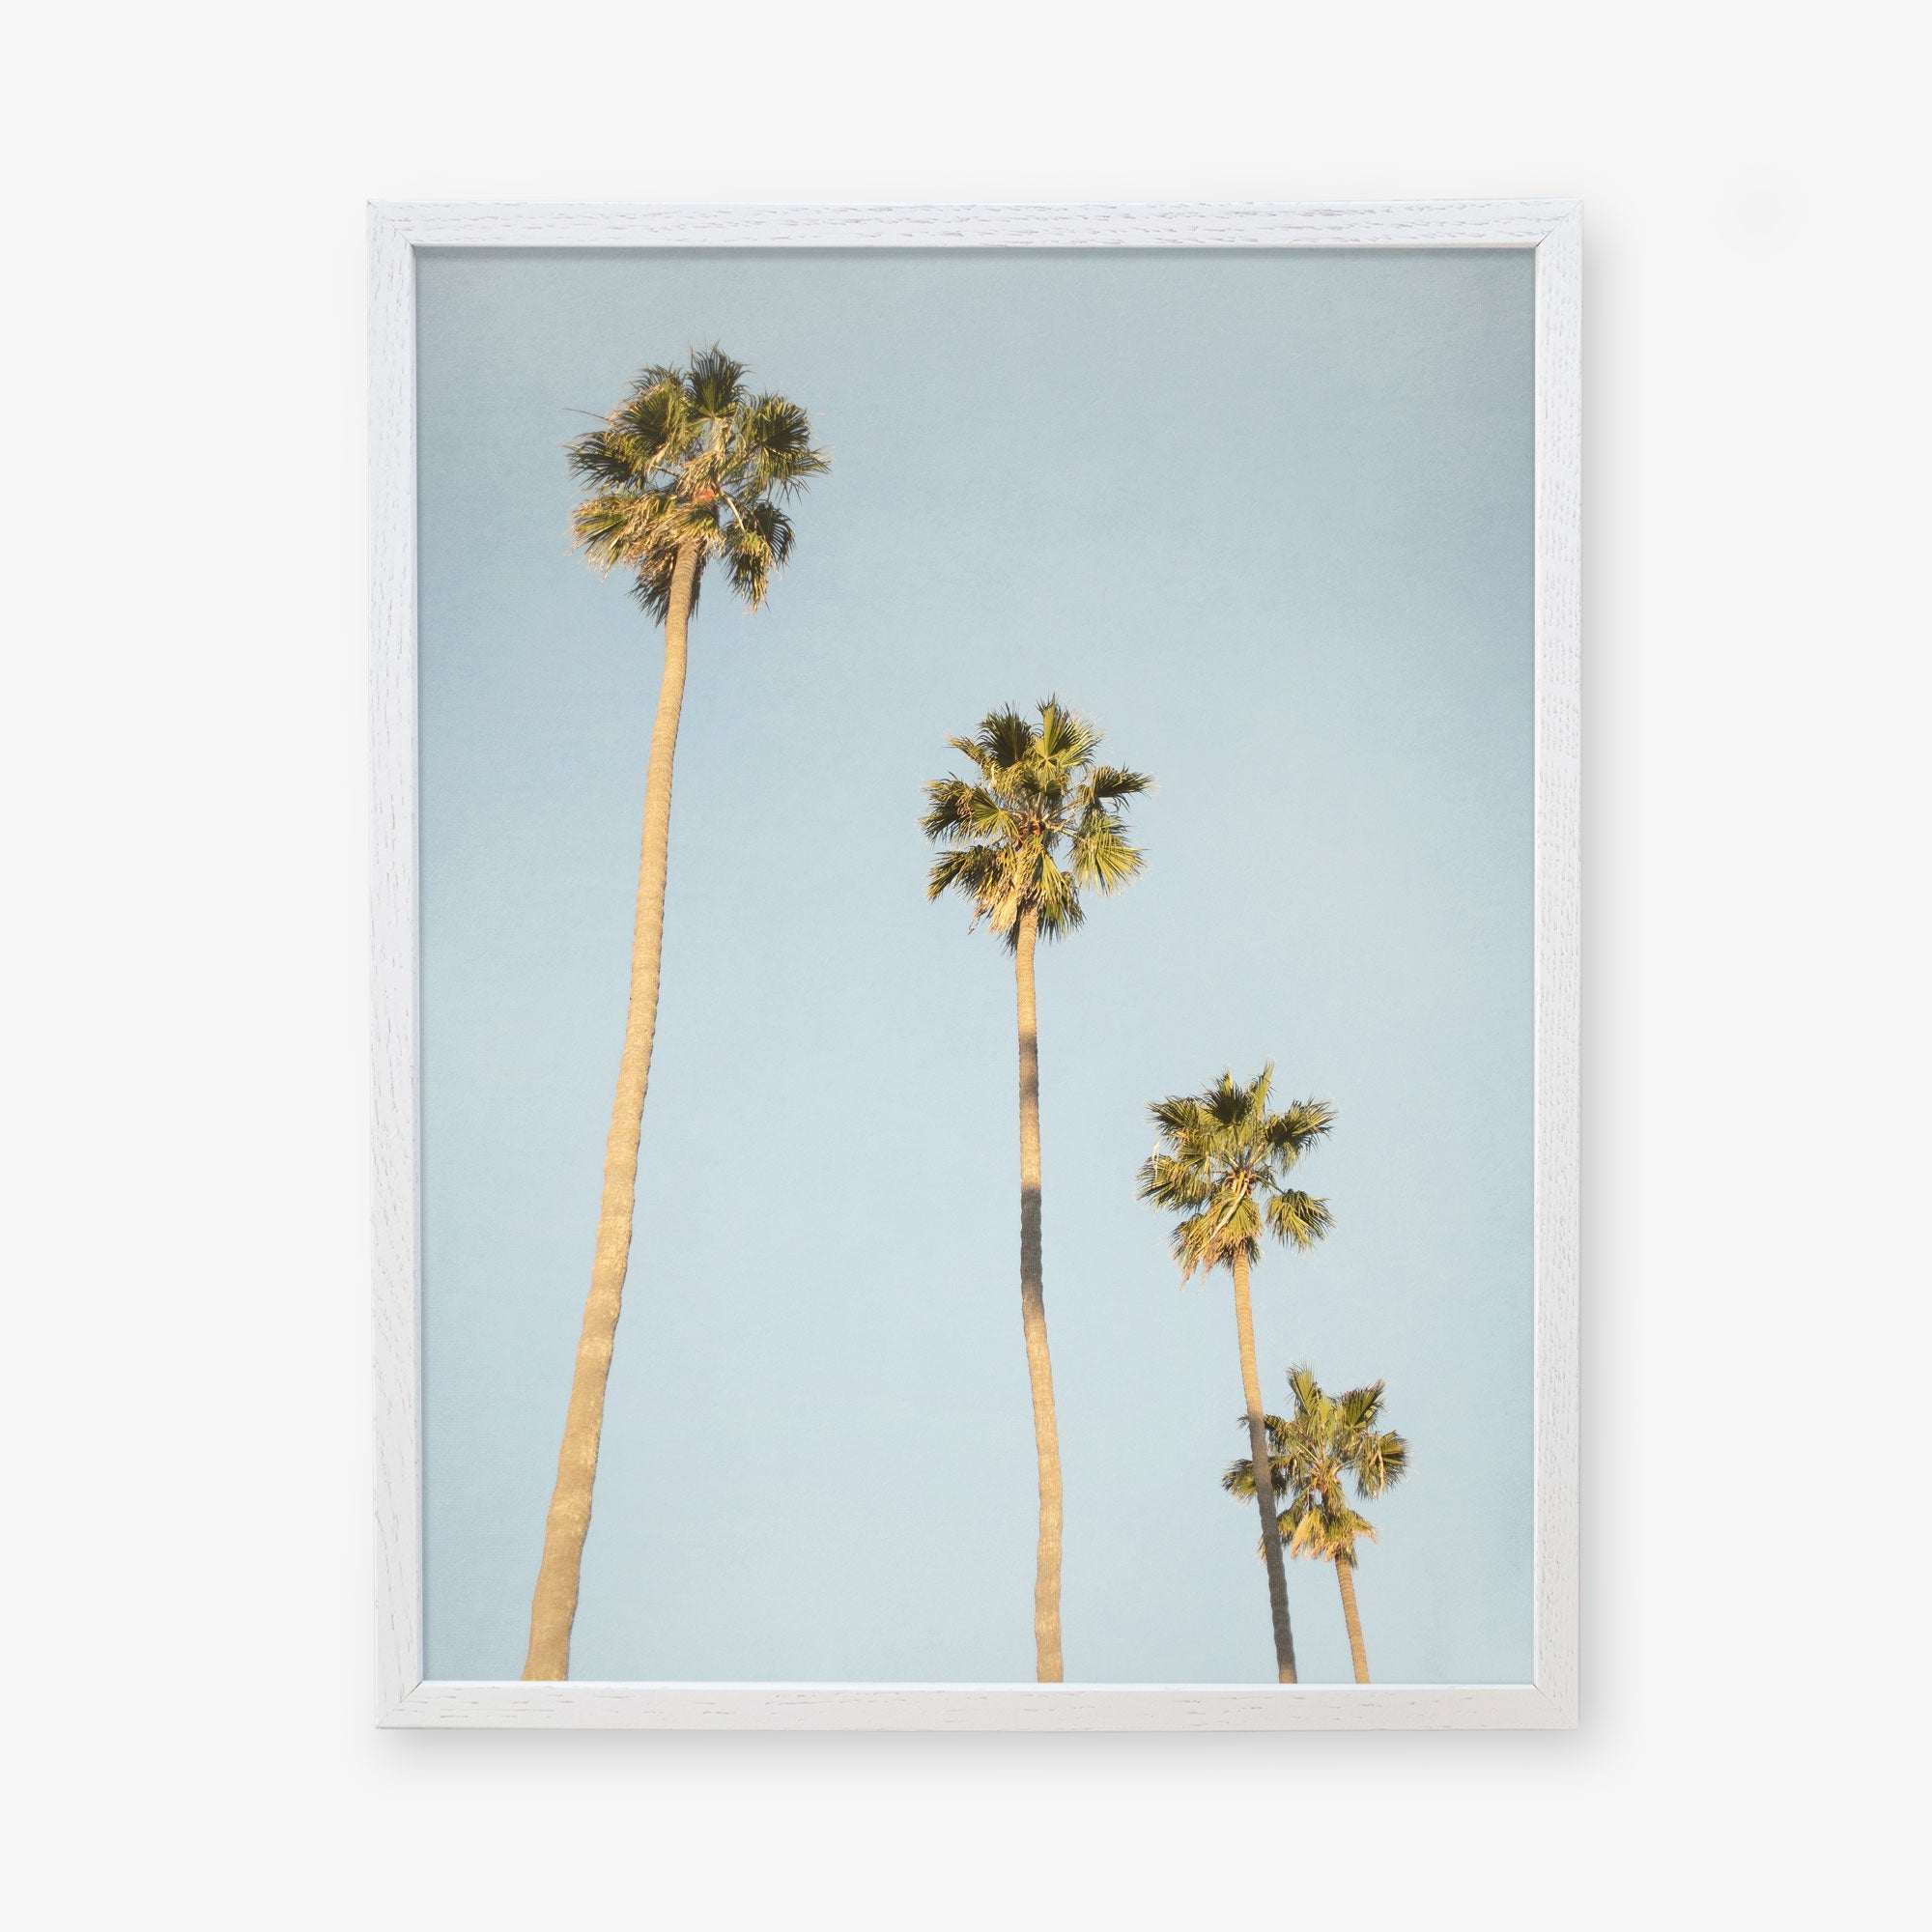 A framed photograph of four tall palm trees against a clear California sky, displayed on a white background - Offley Green&#39;s &quot;Los Angeles Palm Tree Photographic Print &#39;Palm Stairs to Heaven&#39;